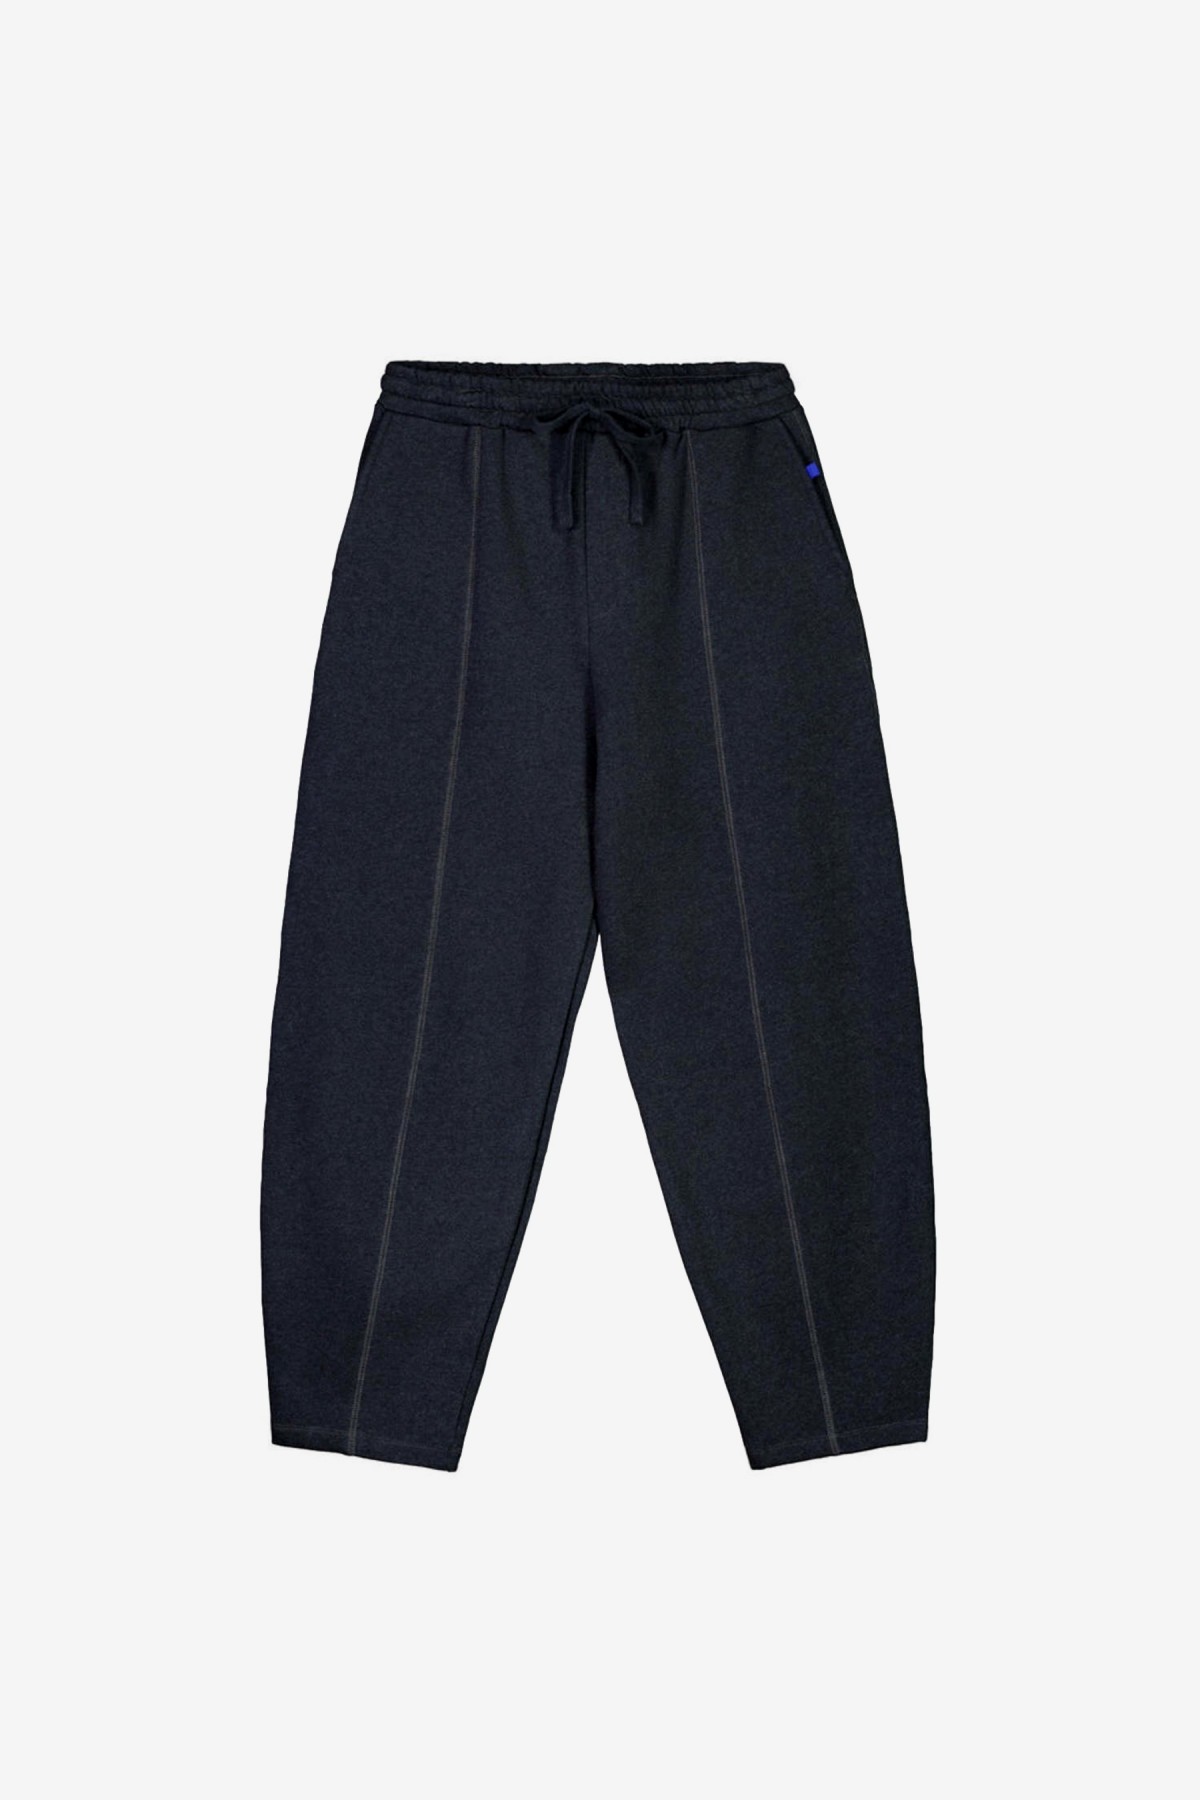 Kowtow Panel Pant in Charcoal Marle